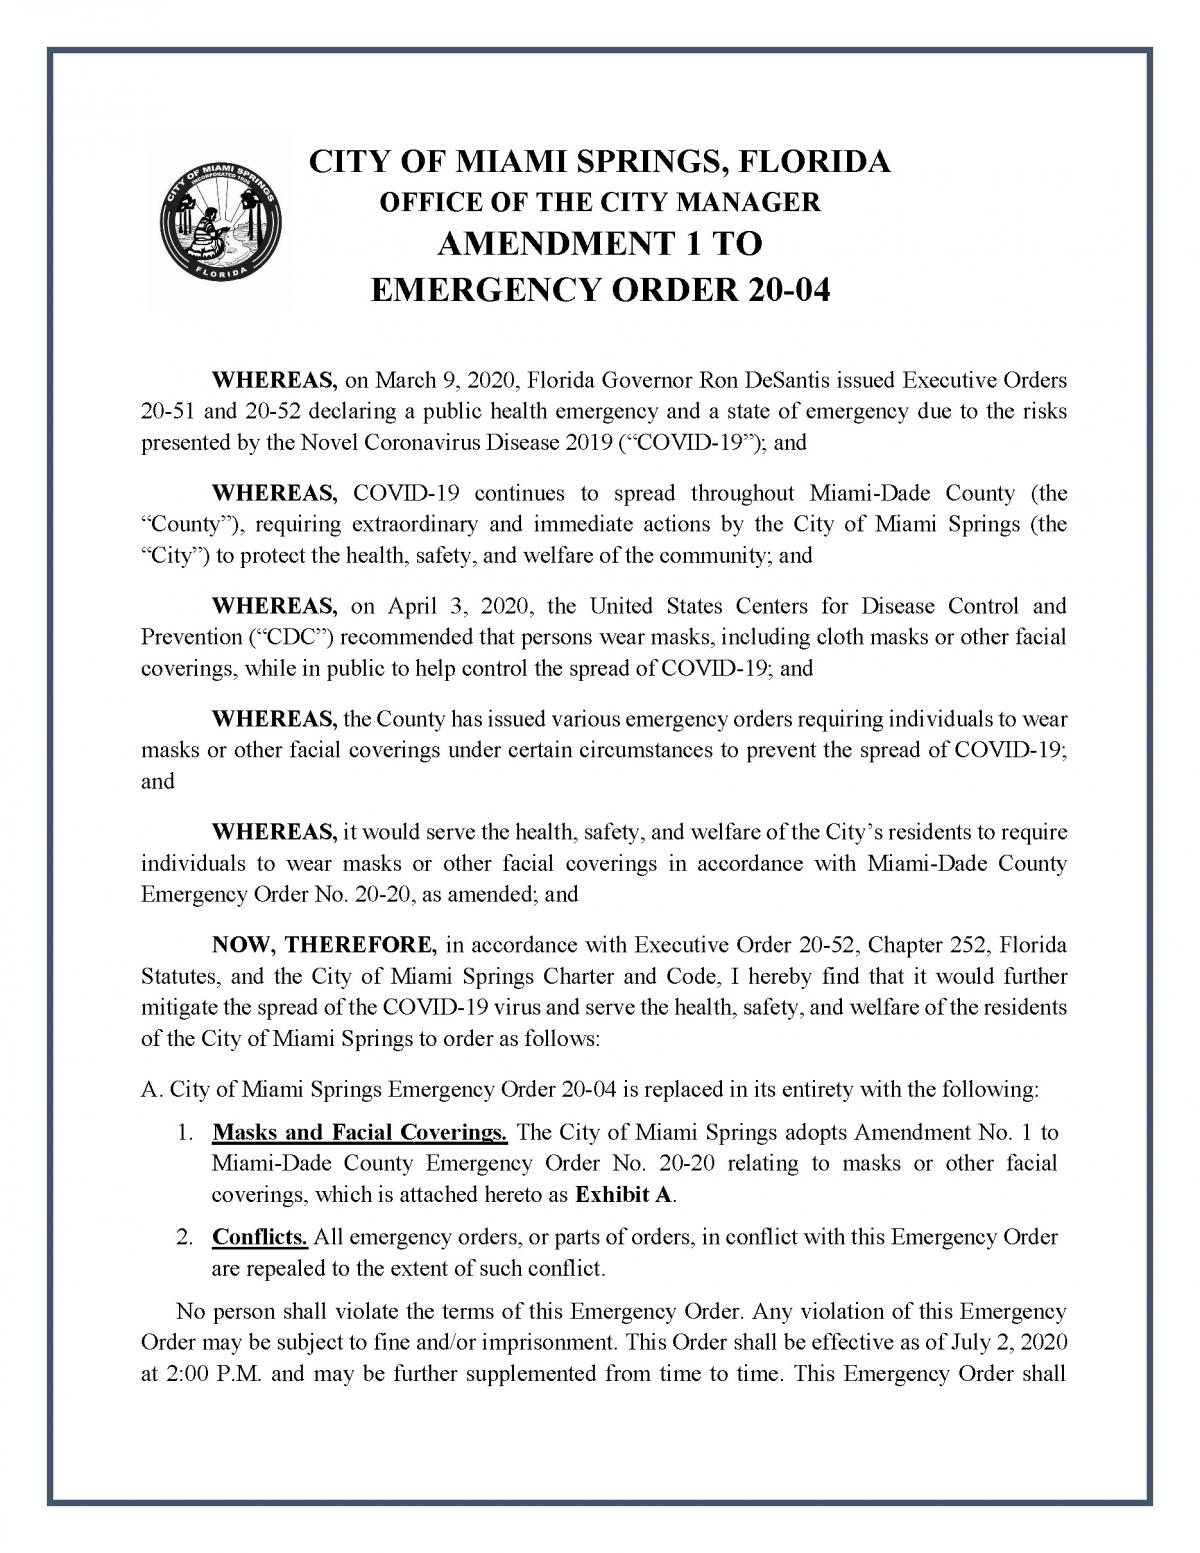 The City Has Issued Amendment 1 to Emergency Order 20-04 Regarding Wearing of Masks